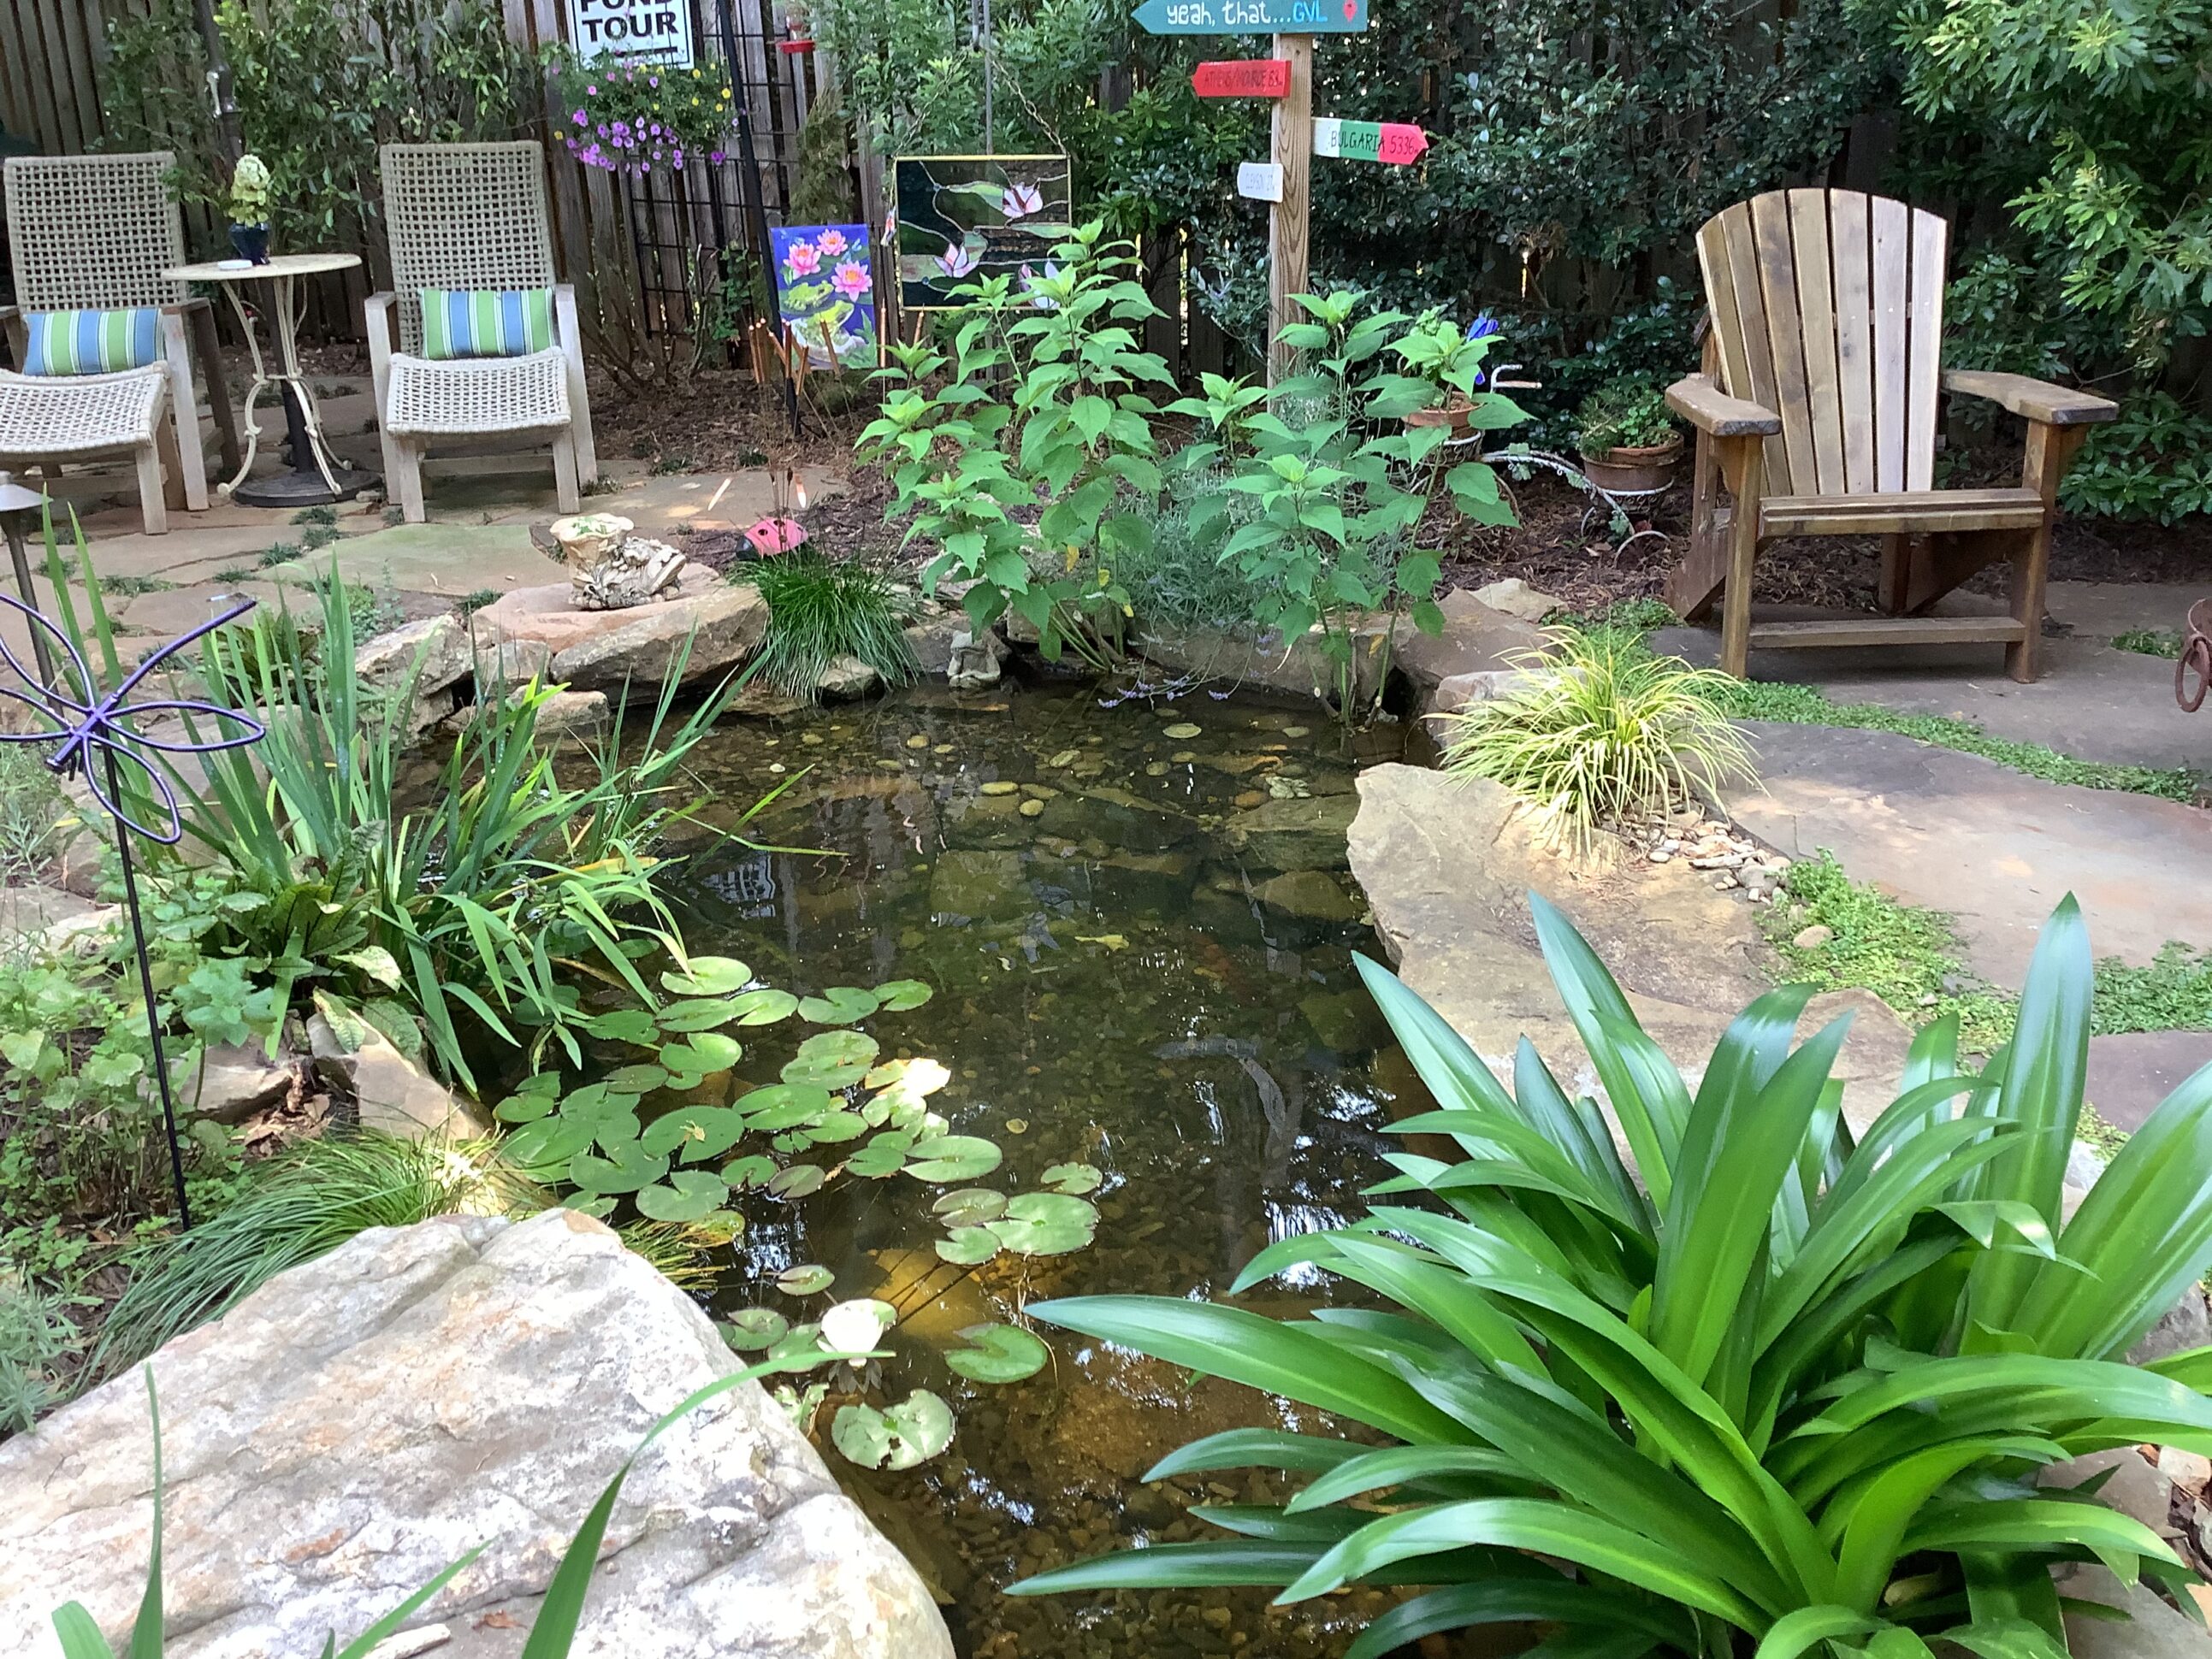 A garden with chairs and plants in the water.